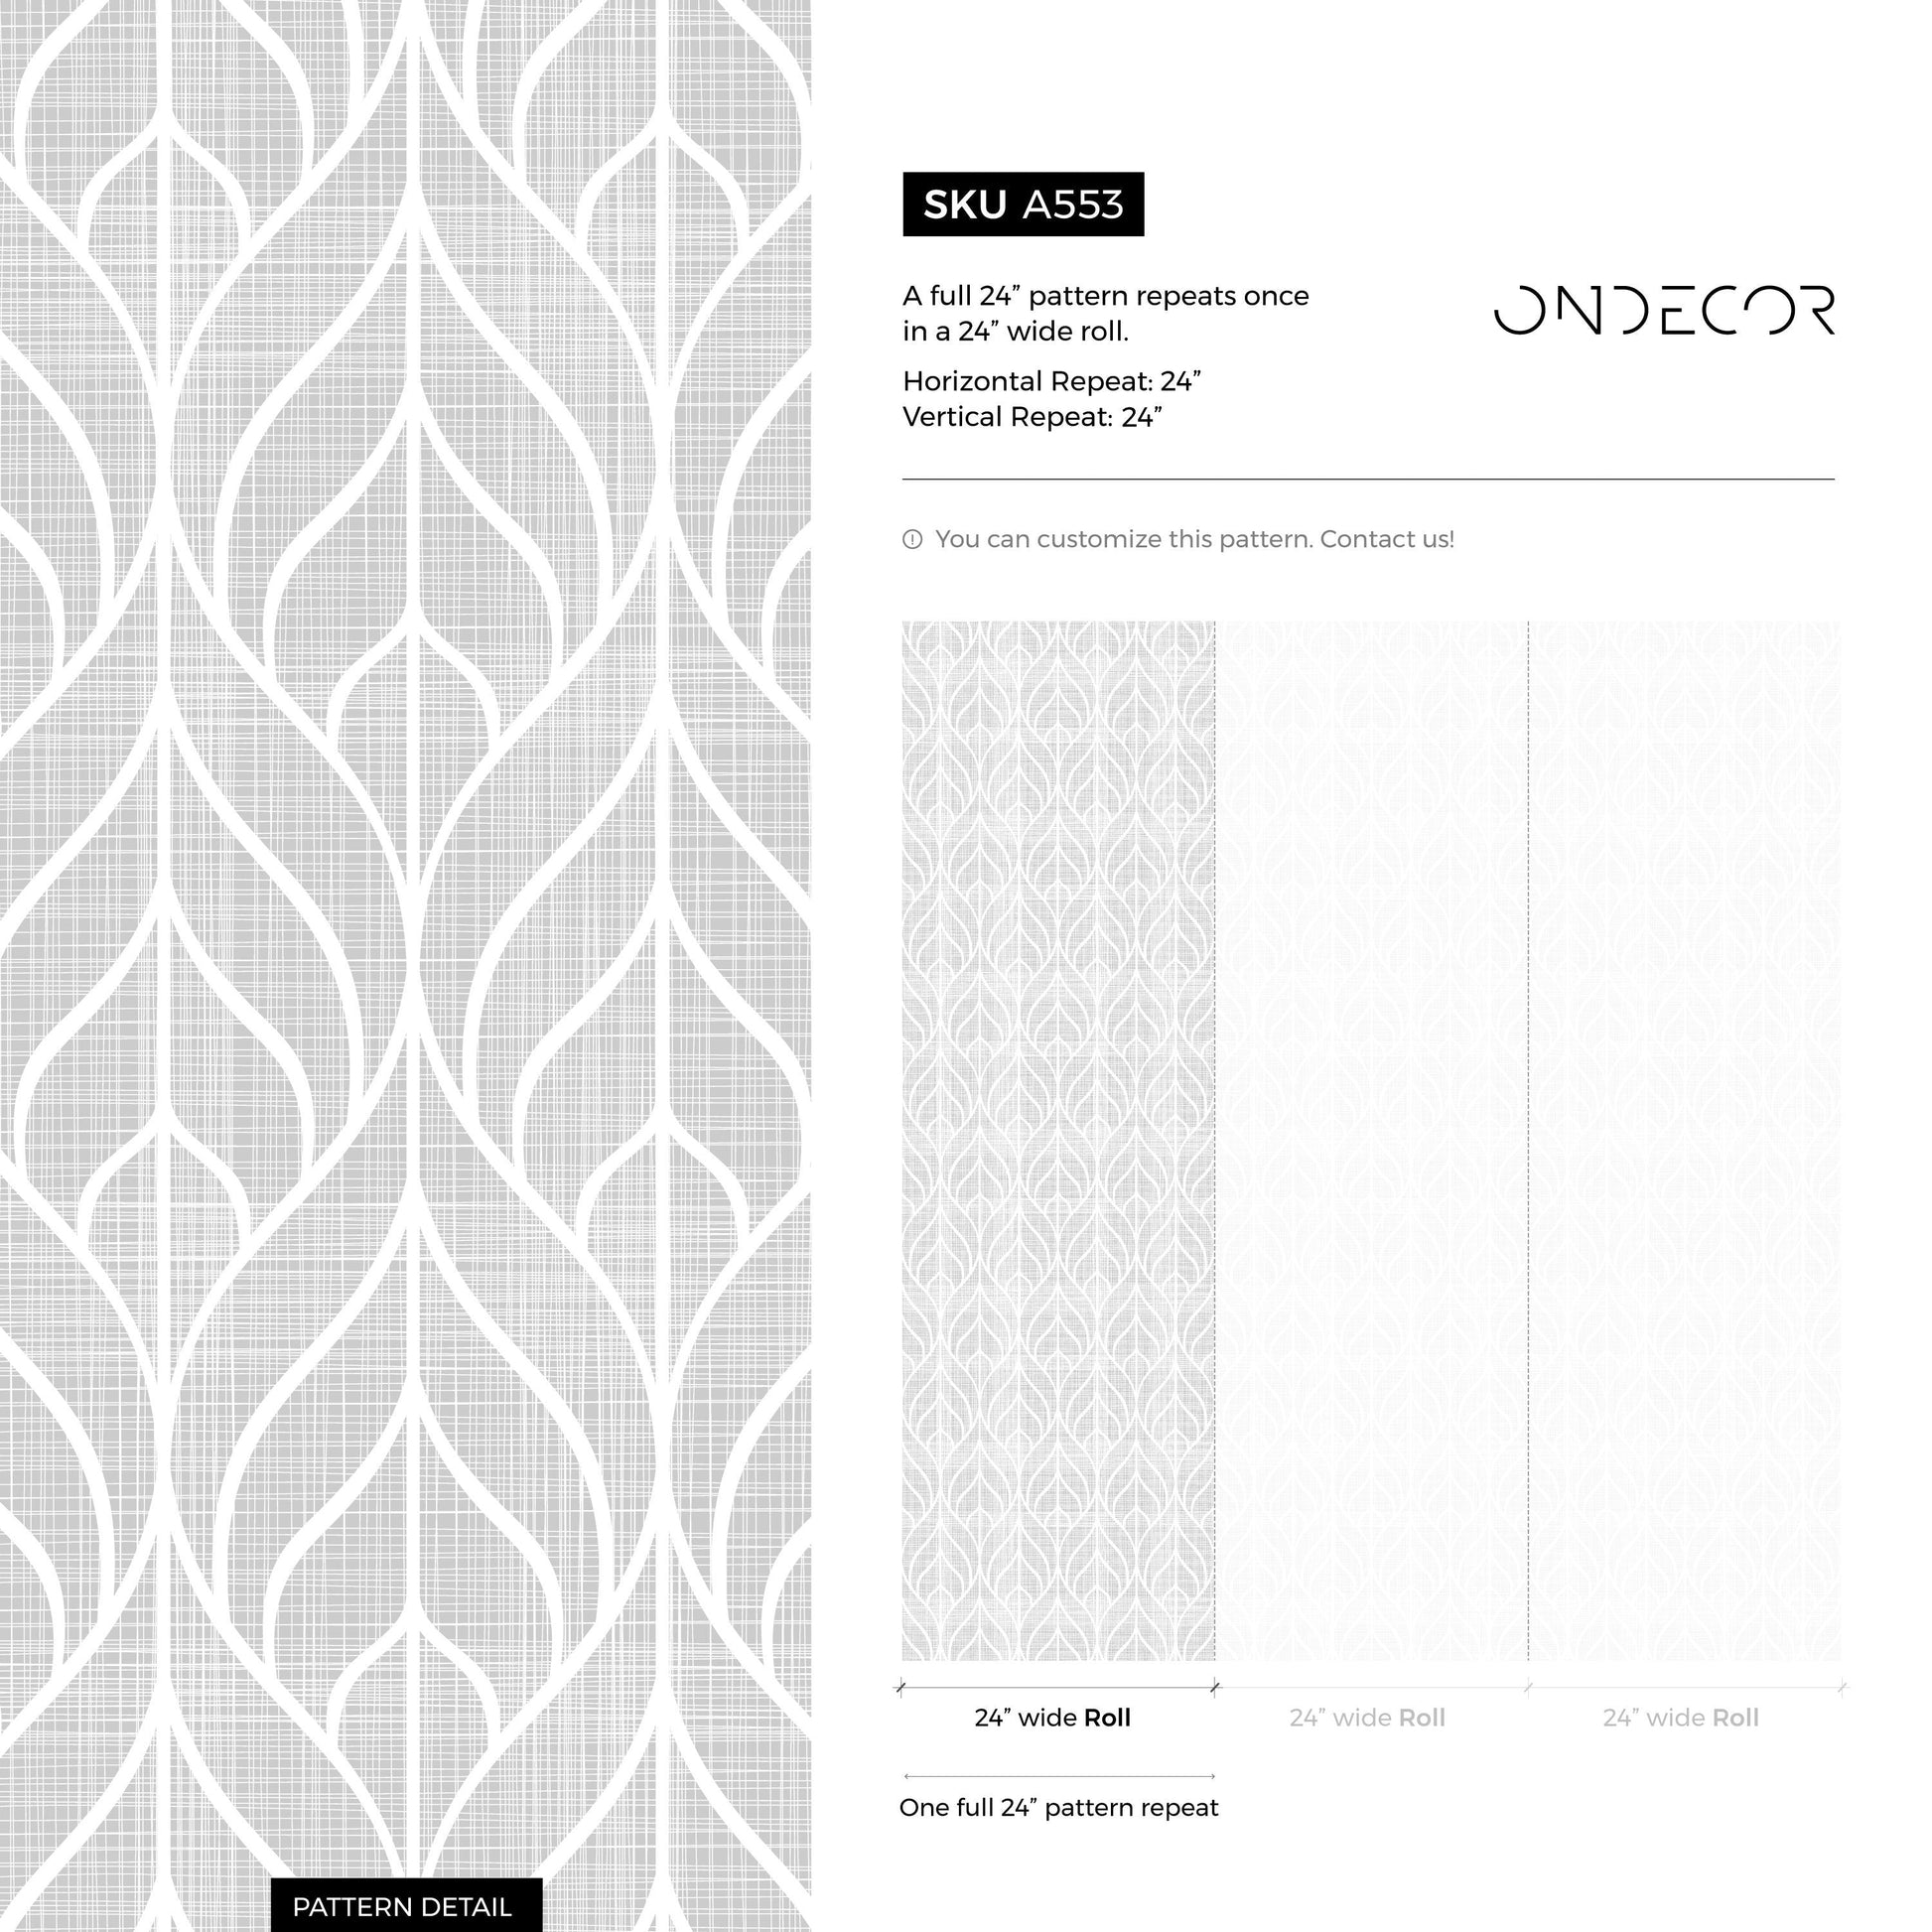 Removable Wallpaper Peel and Stick Wallpaper Wall Paper Wall Mural - Geometric Gray Wallpaper - A553